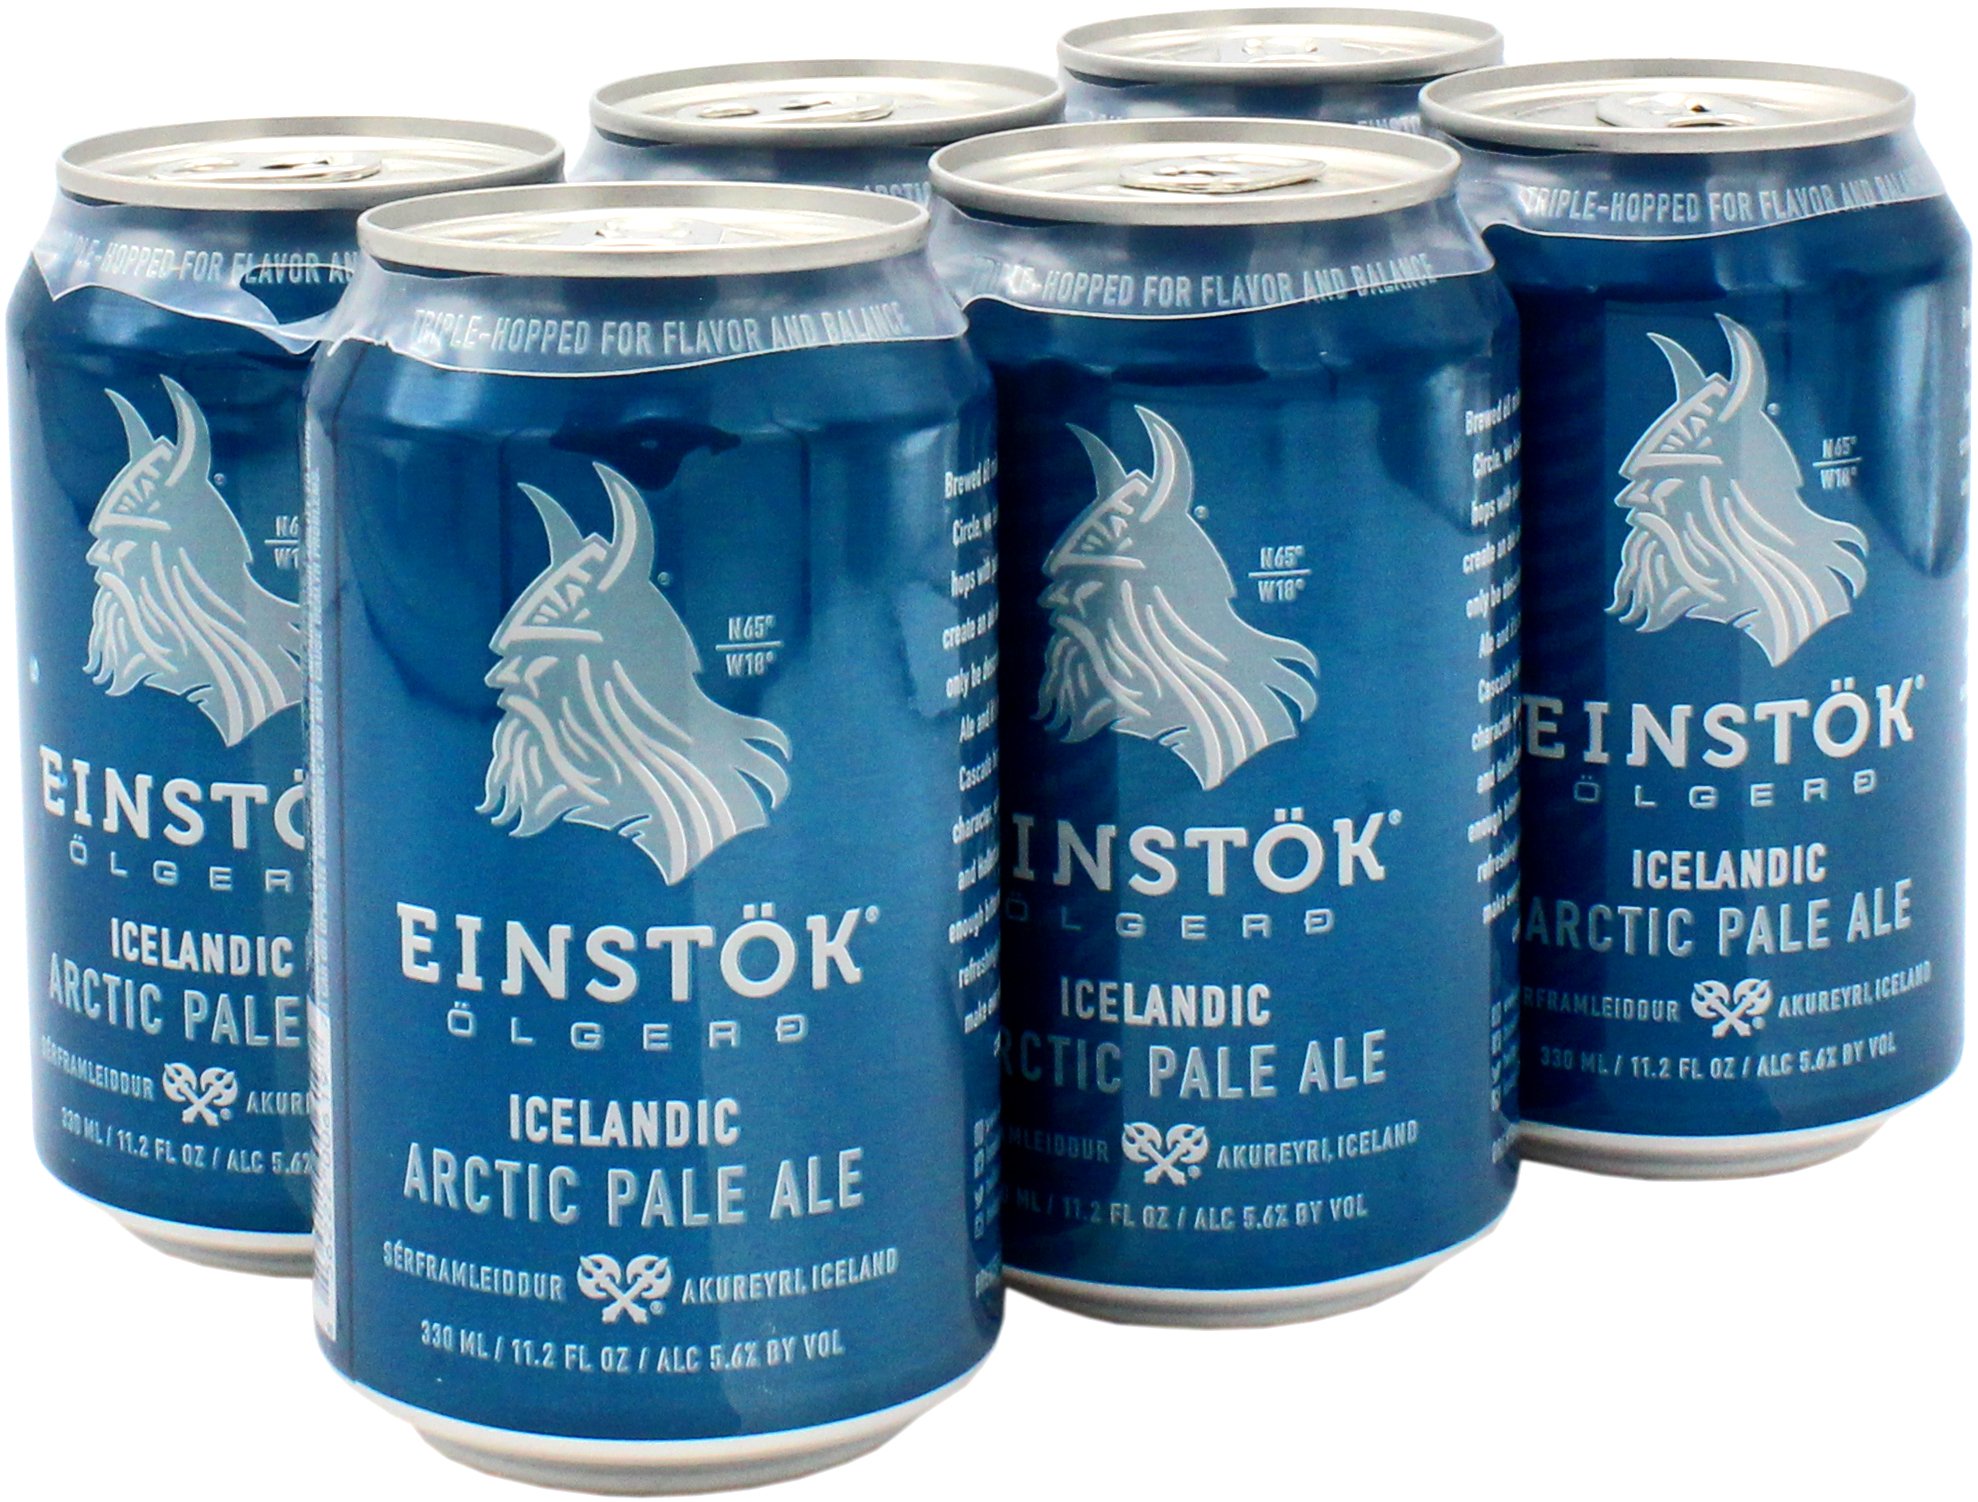 Einstock Icelandic Arctic Pale Ale Beer 12 oz Cans - Shop Beer at H-E-B